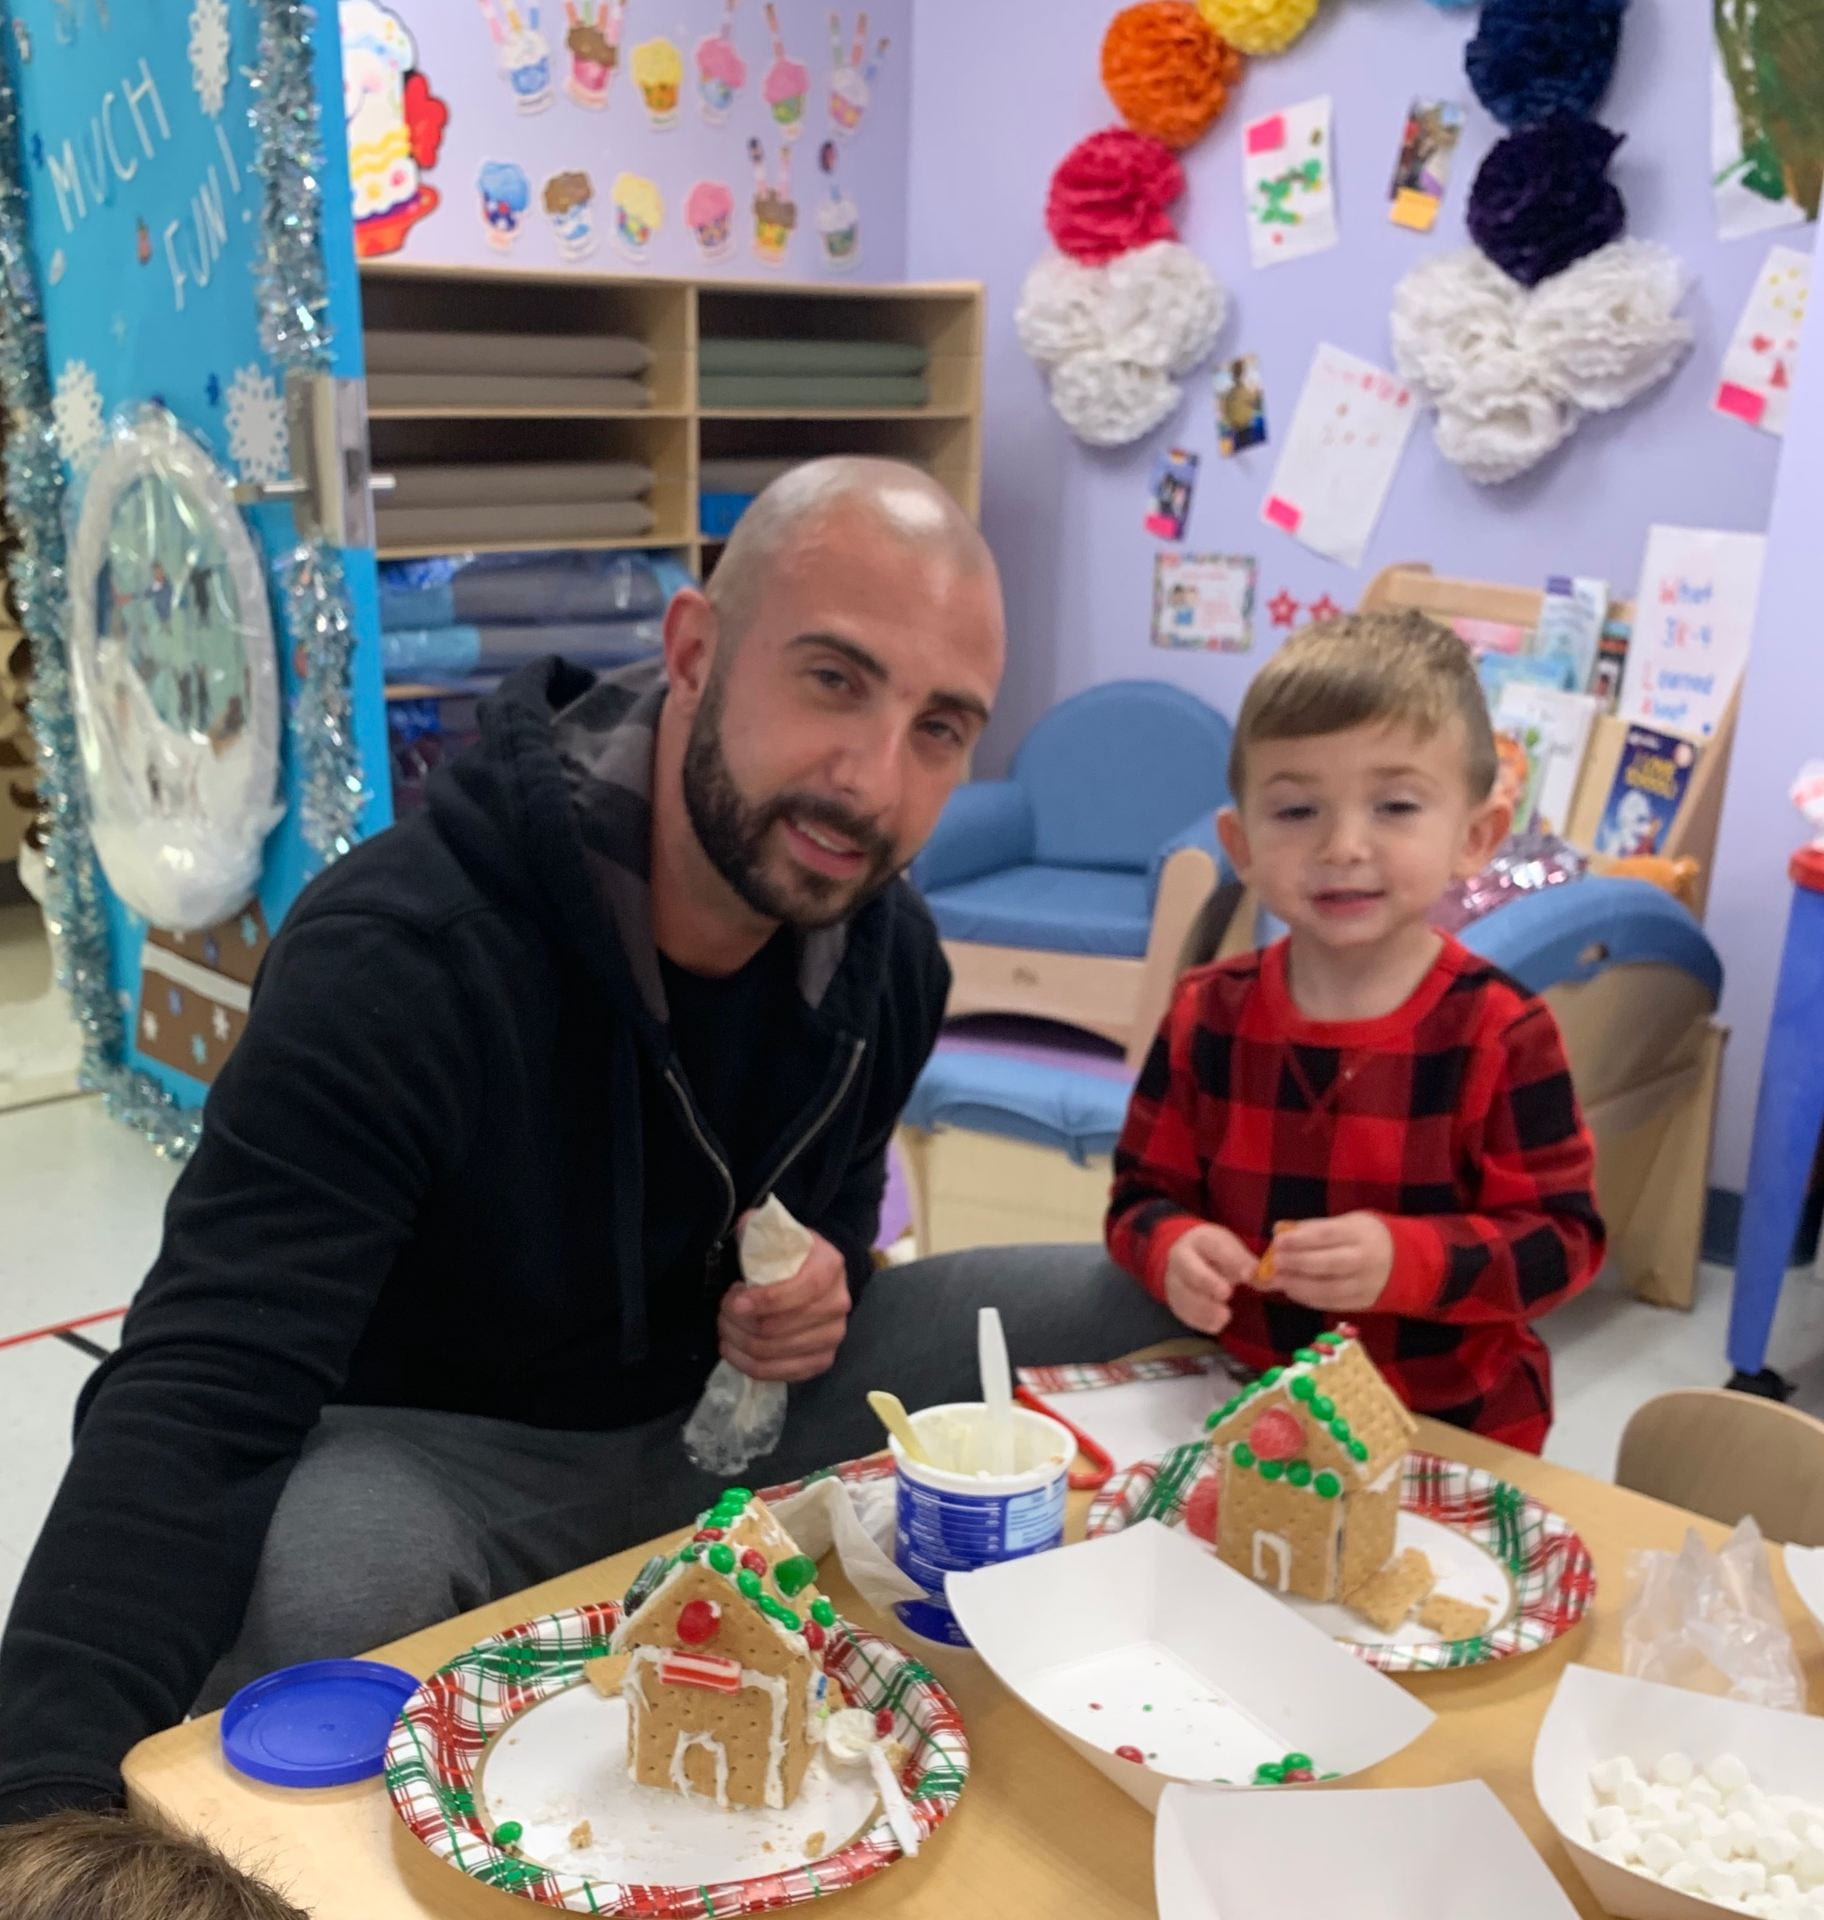 Student and his dad are creating a beautiful gingerbread house.